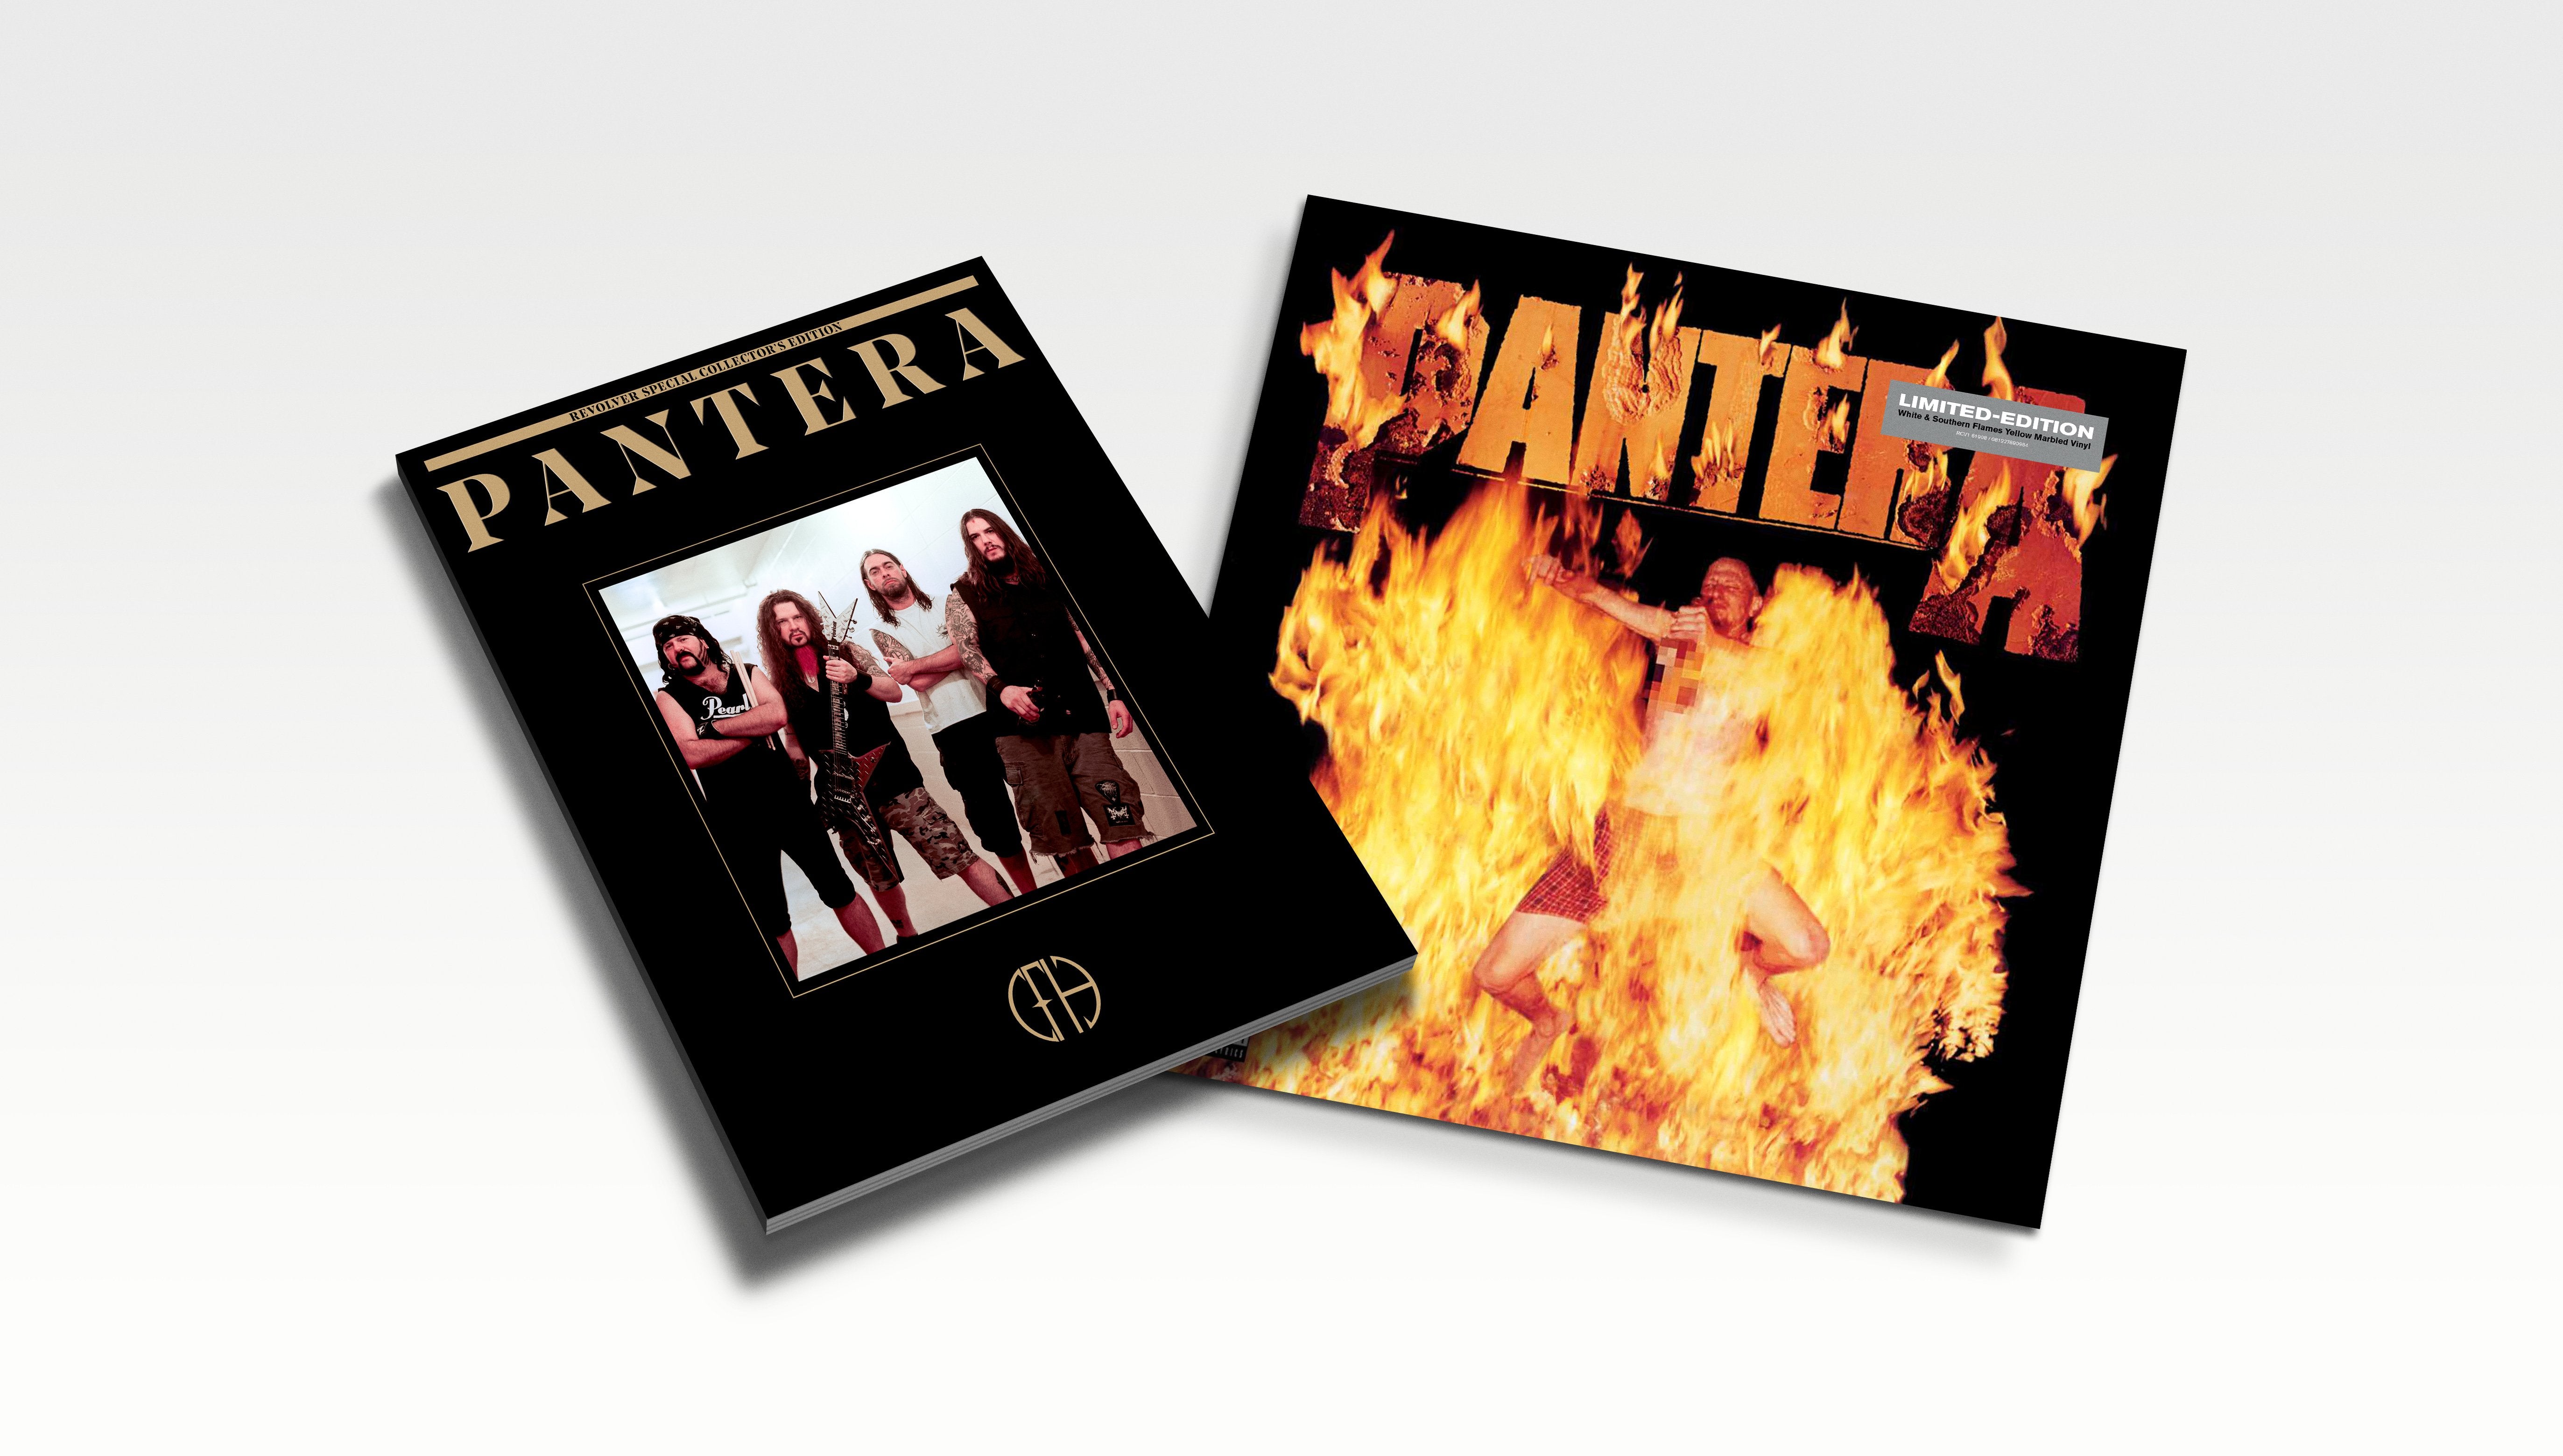 PANTERA 'REINVENTING THE STEEL' - LP + BOOK OF PANTERA SPECIAL COLLECTOR'S EDITION BUNDLE